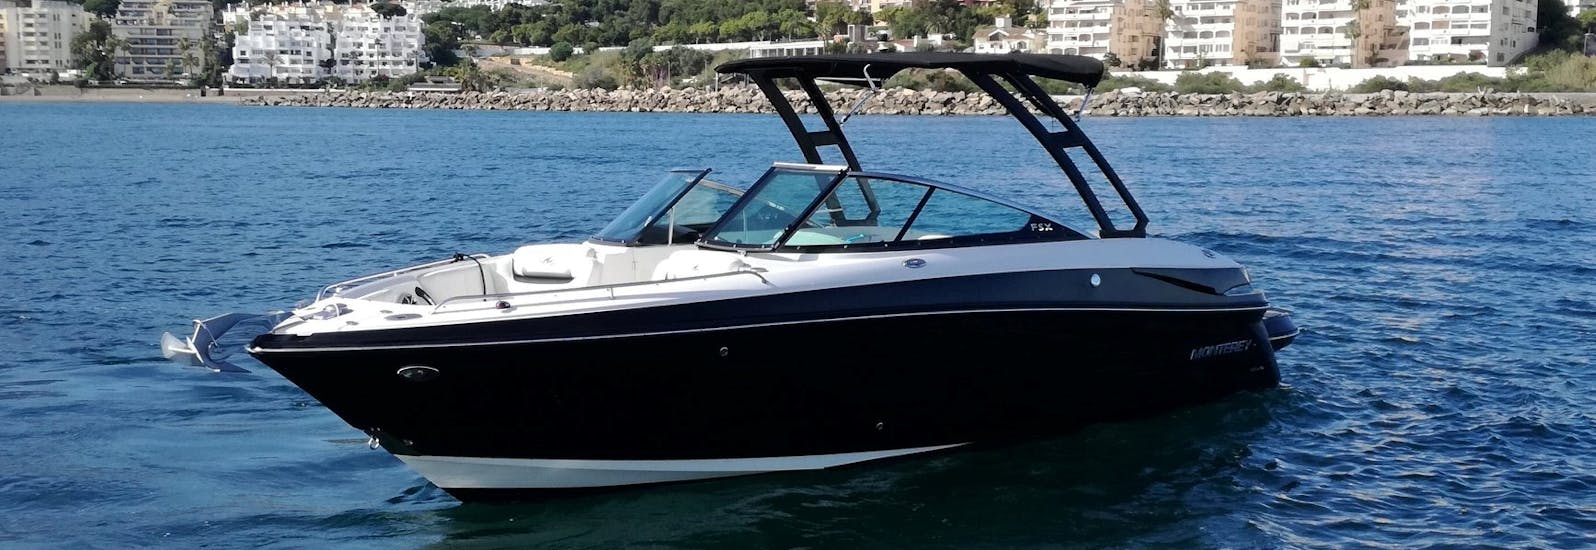 Our boat in the sea during a Private Boat Trip in Estepona with Swimming with OfBlue Rental Boats.